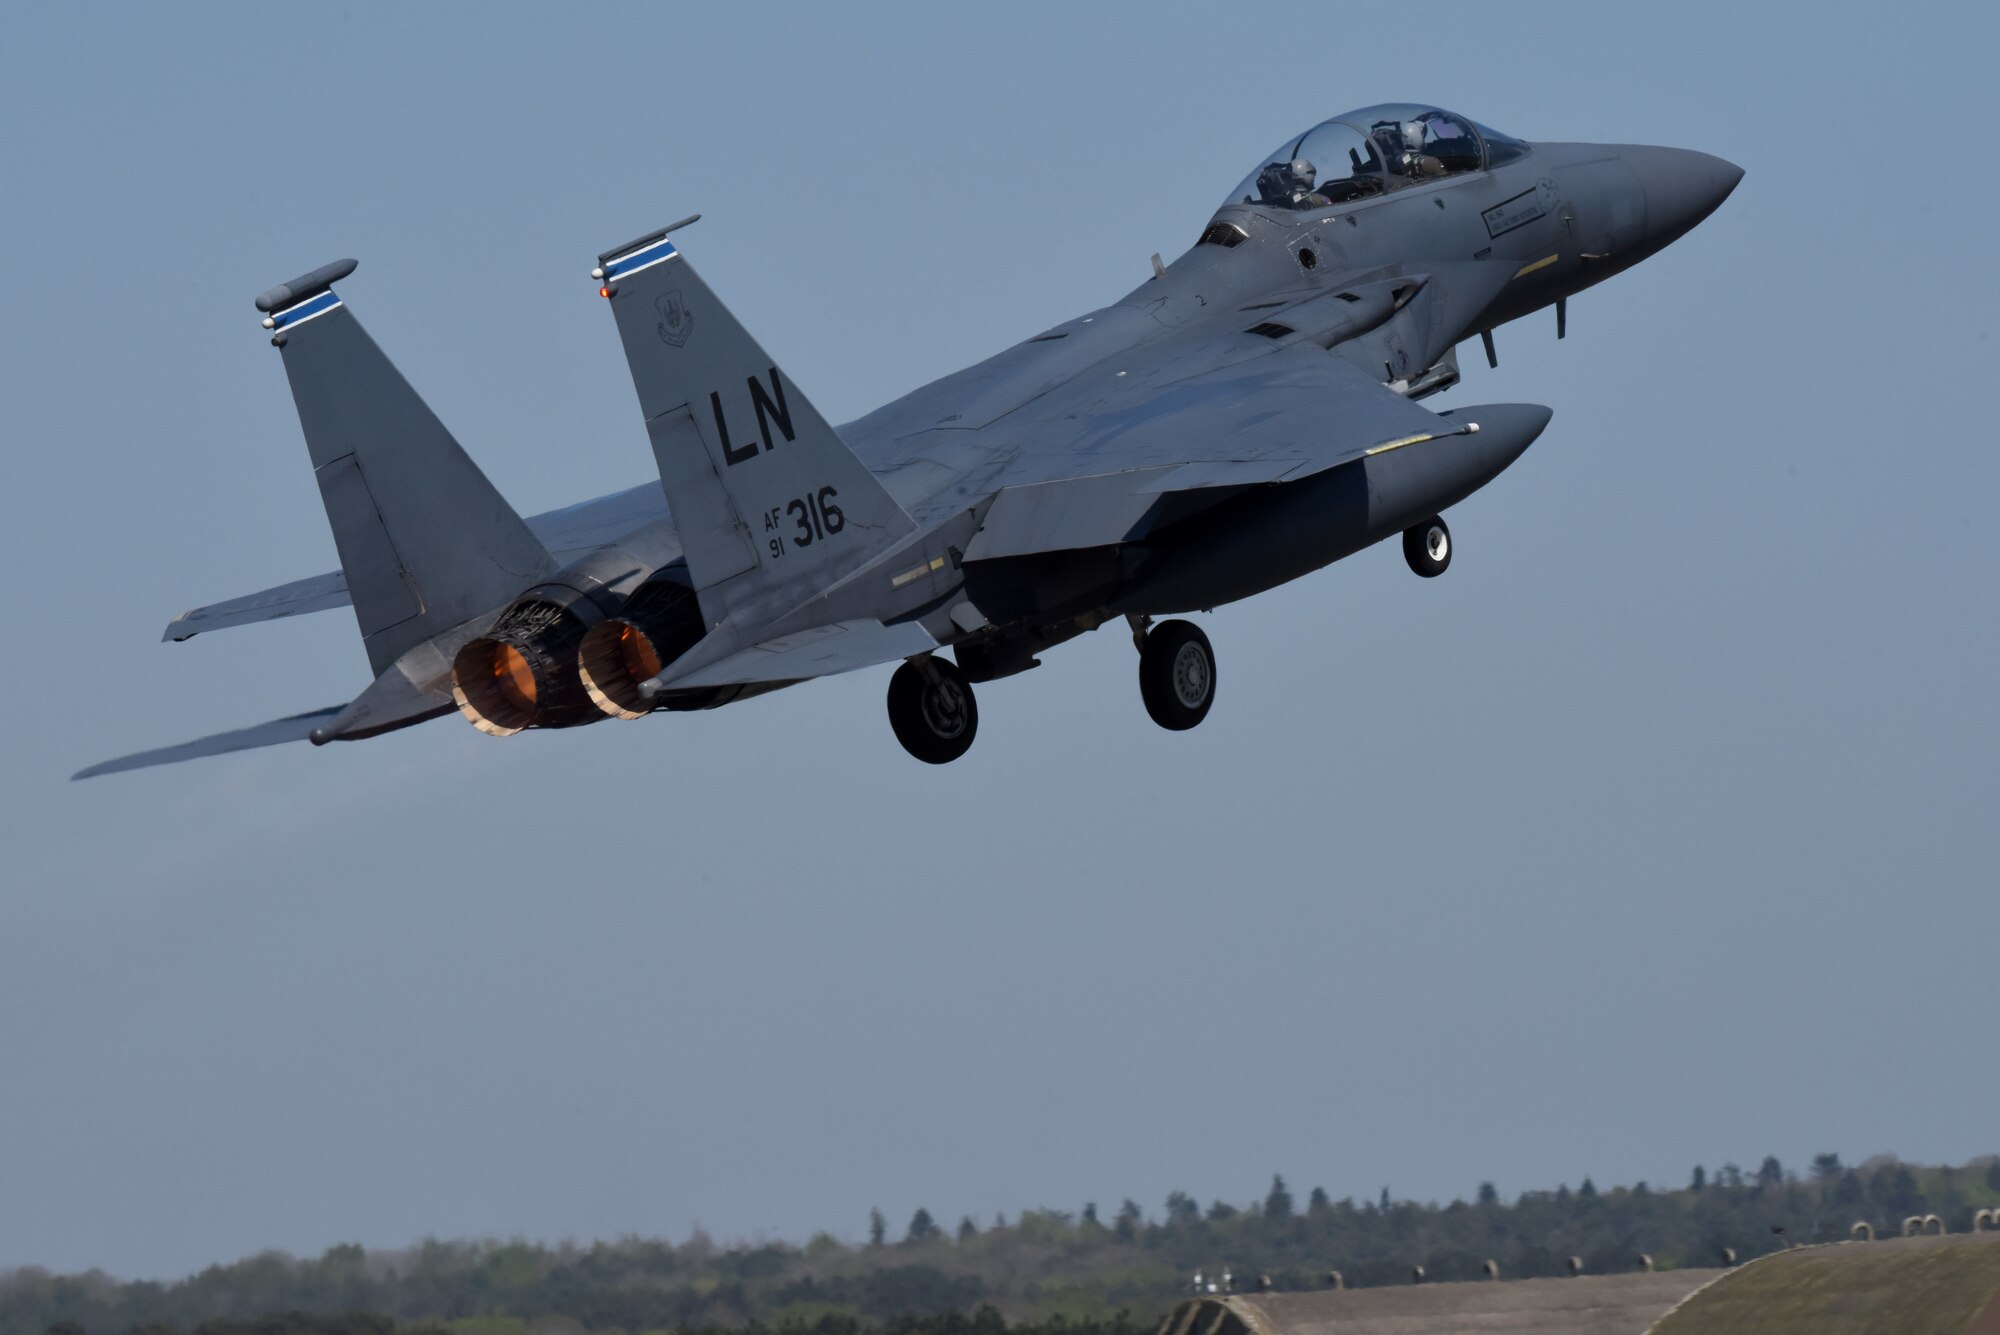 An F-15E Strike Eagle assigned to the 492nd Fighter Squadron takes off at Royal Air Force Lakenheath, England, April 21, 2020. The F-15E Strike Eagle navigation system uses a laser gyro and a Global Positioning System to continuously monitor the aircraft's position and provide information to the central computer and other systems, including a digital moving map in both cockpits. (U.S. Air Force photo by Airman 1st Class Rhonda Smith)